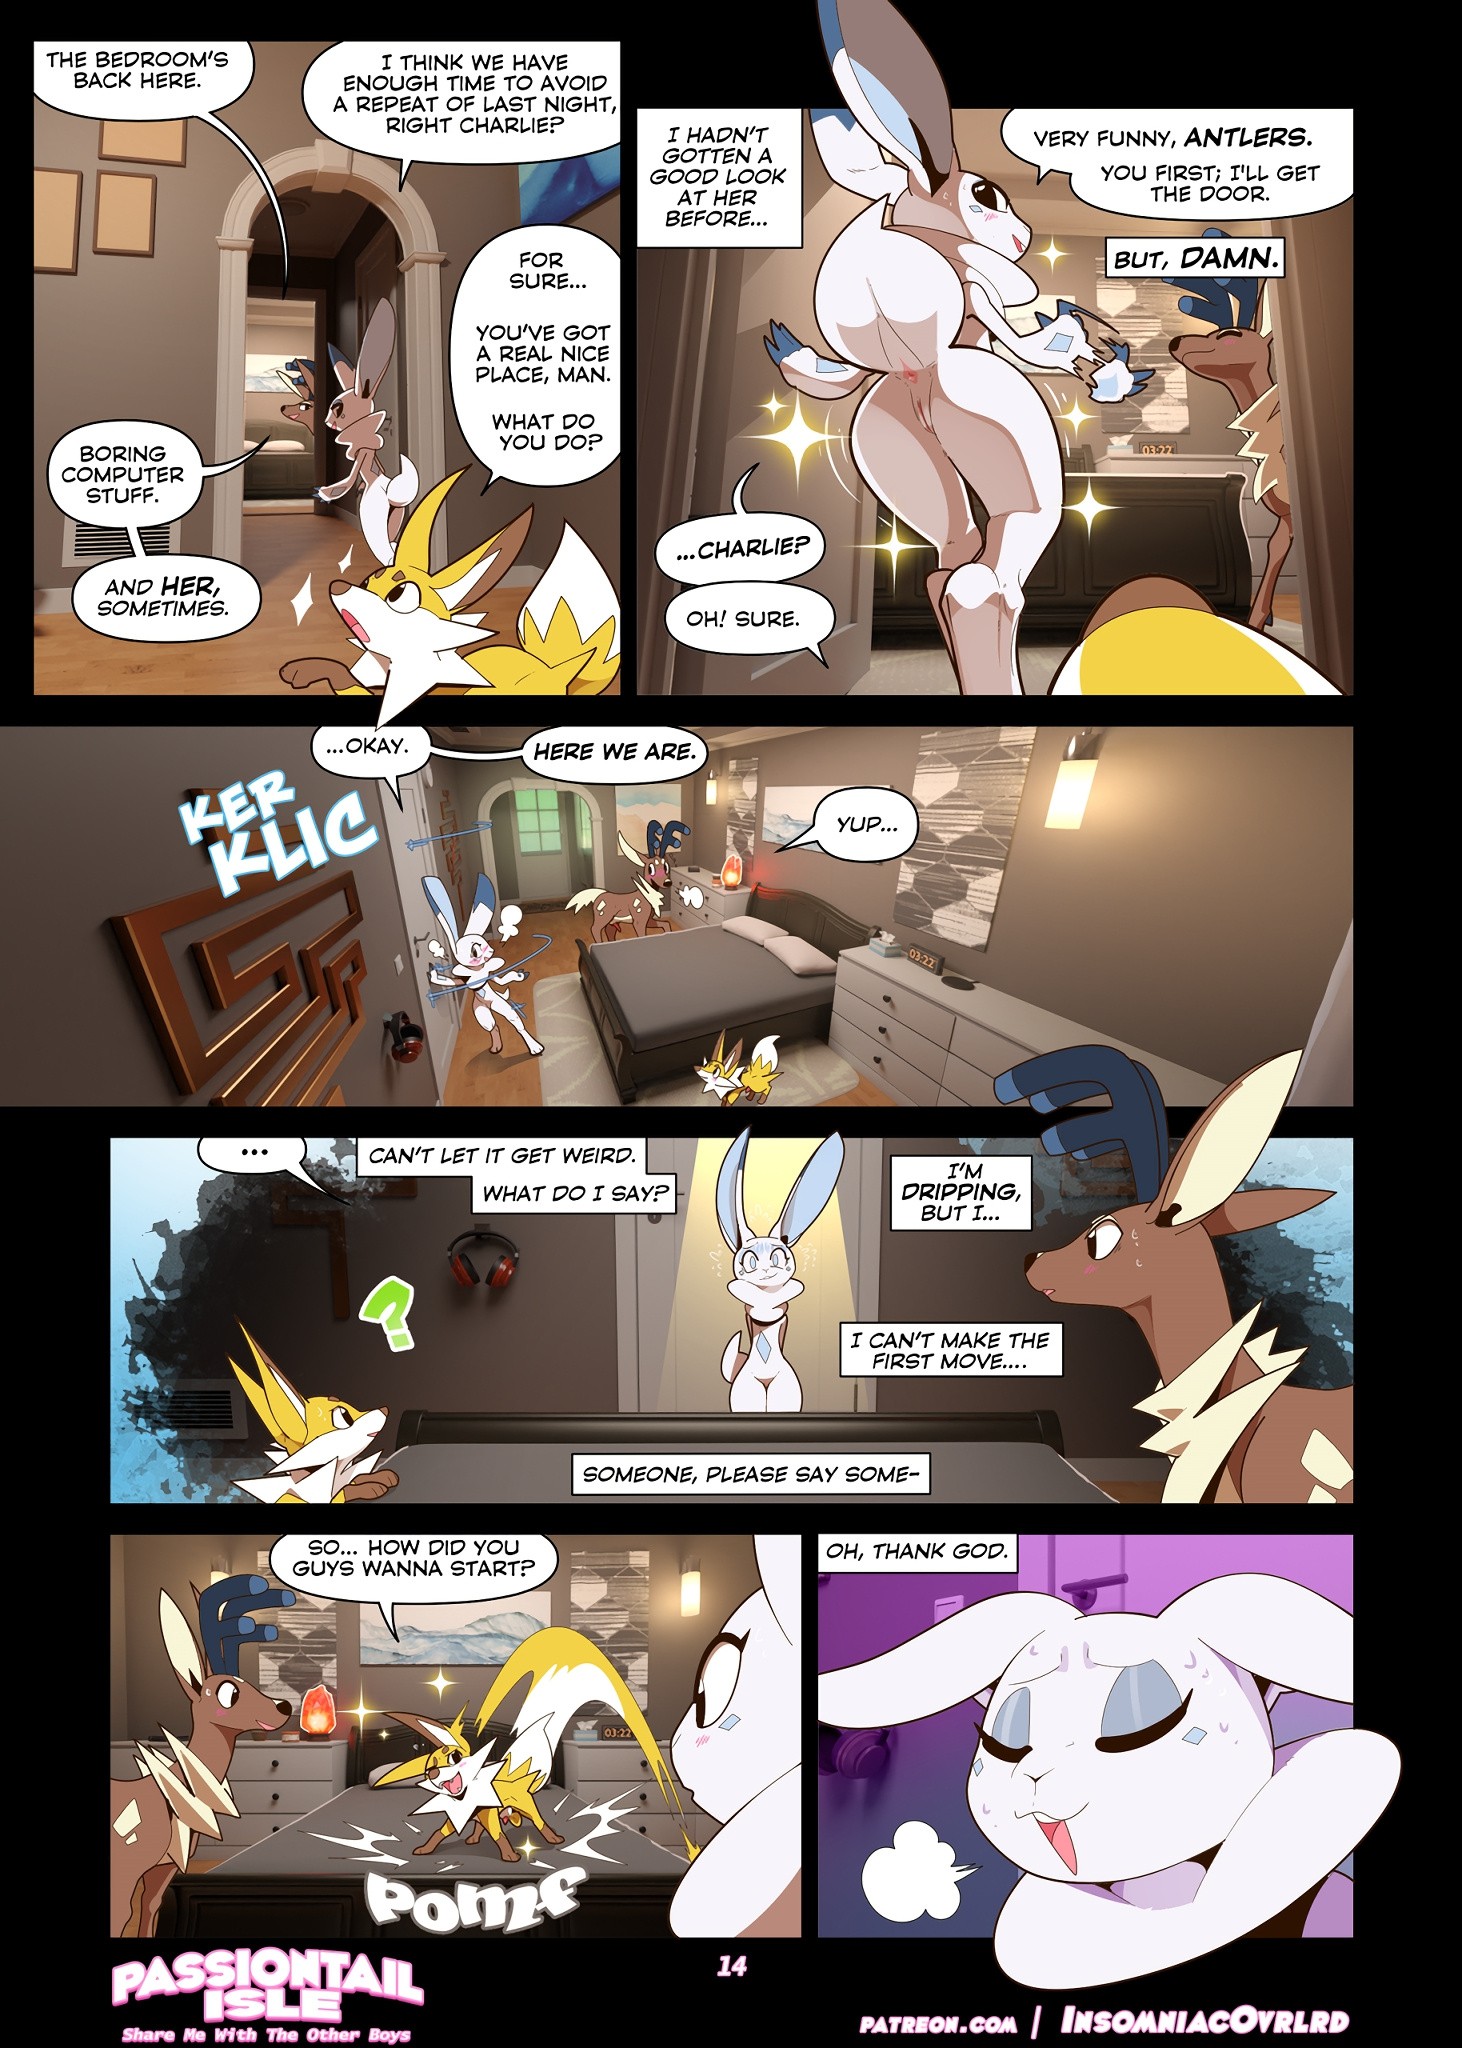 Passiontail Isle: Share Me With The Other Boys porn comic picture 15